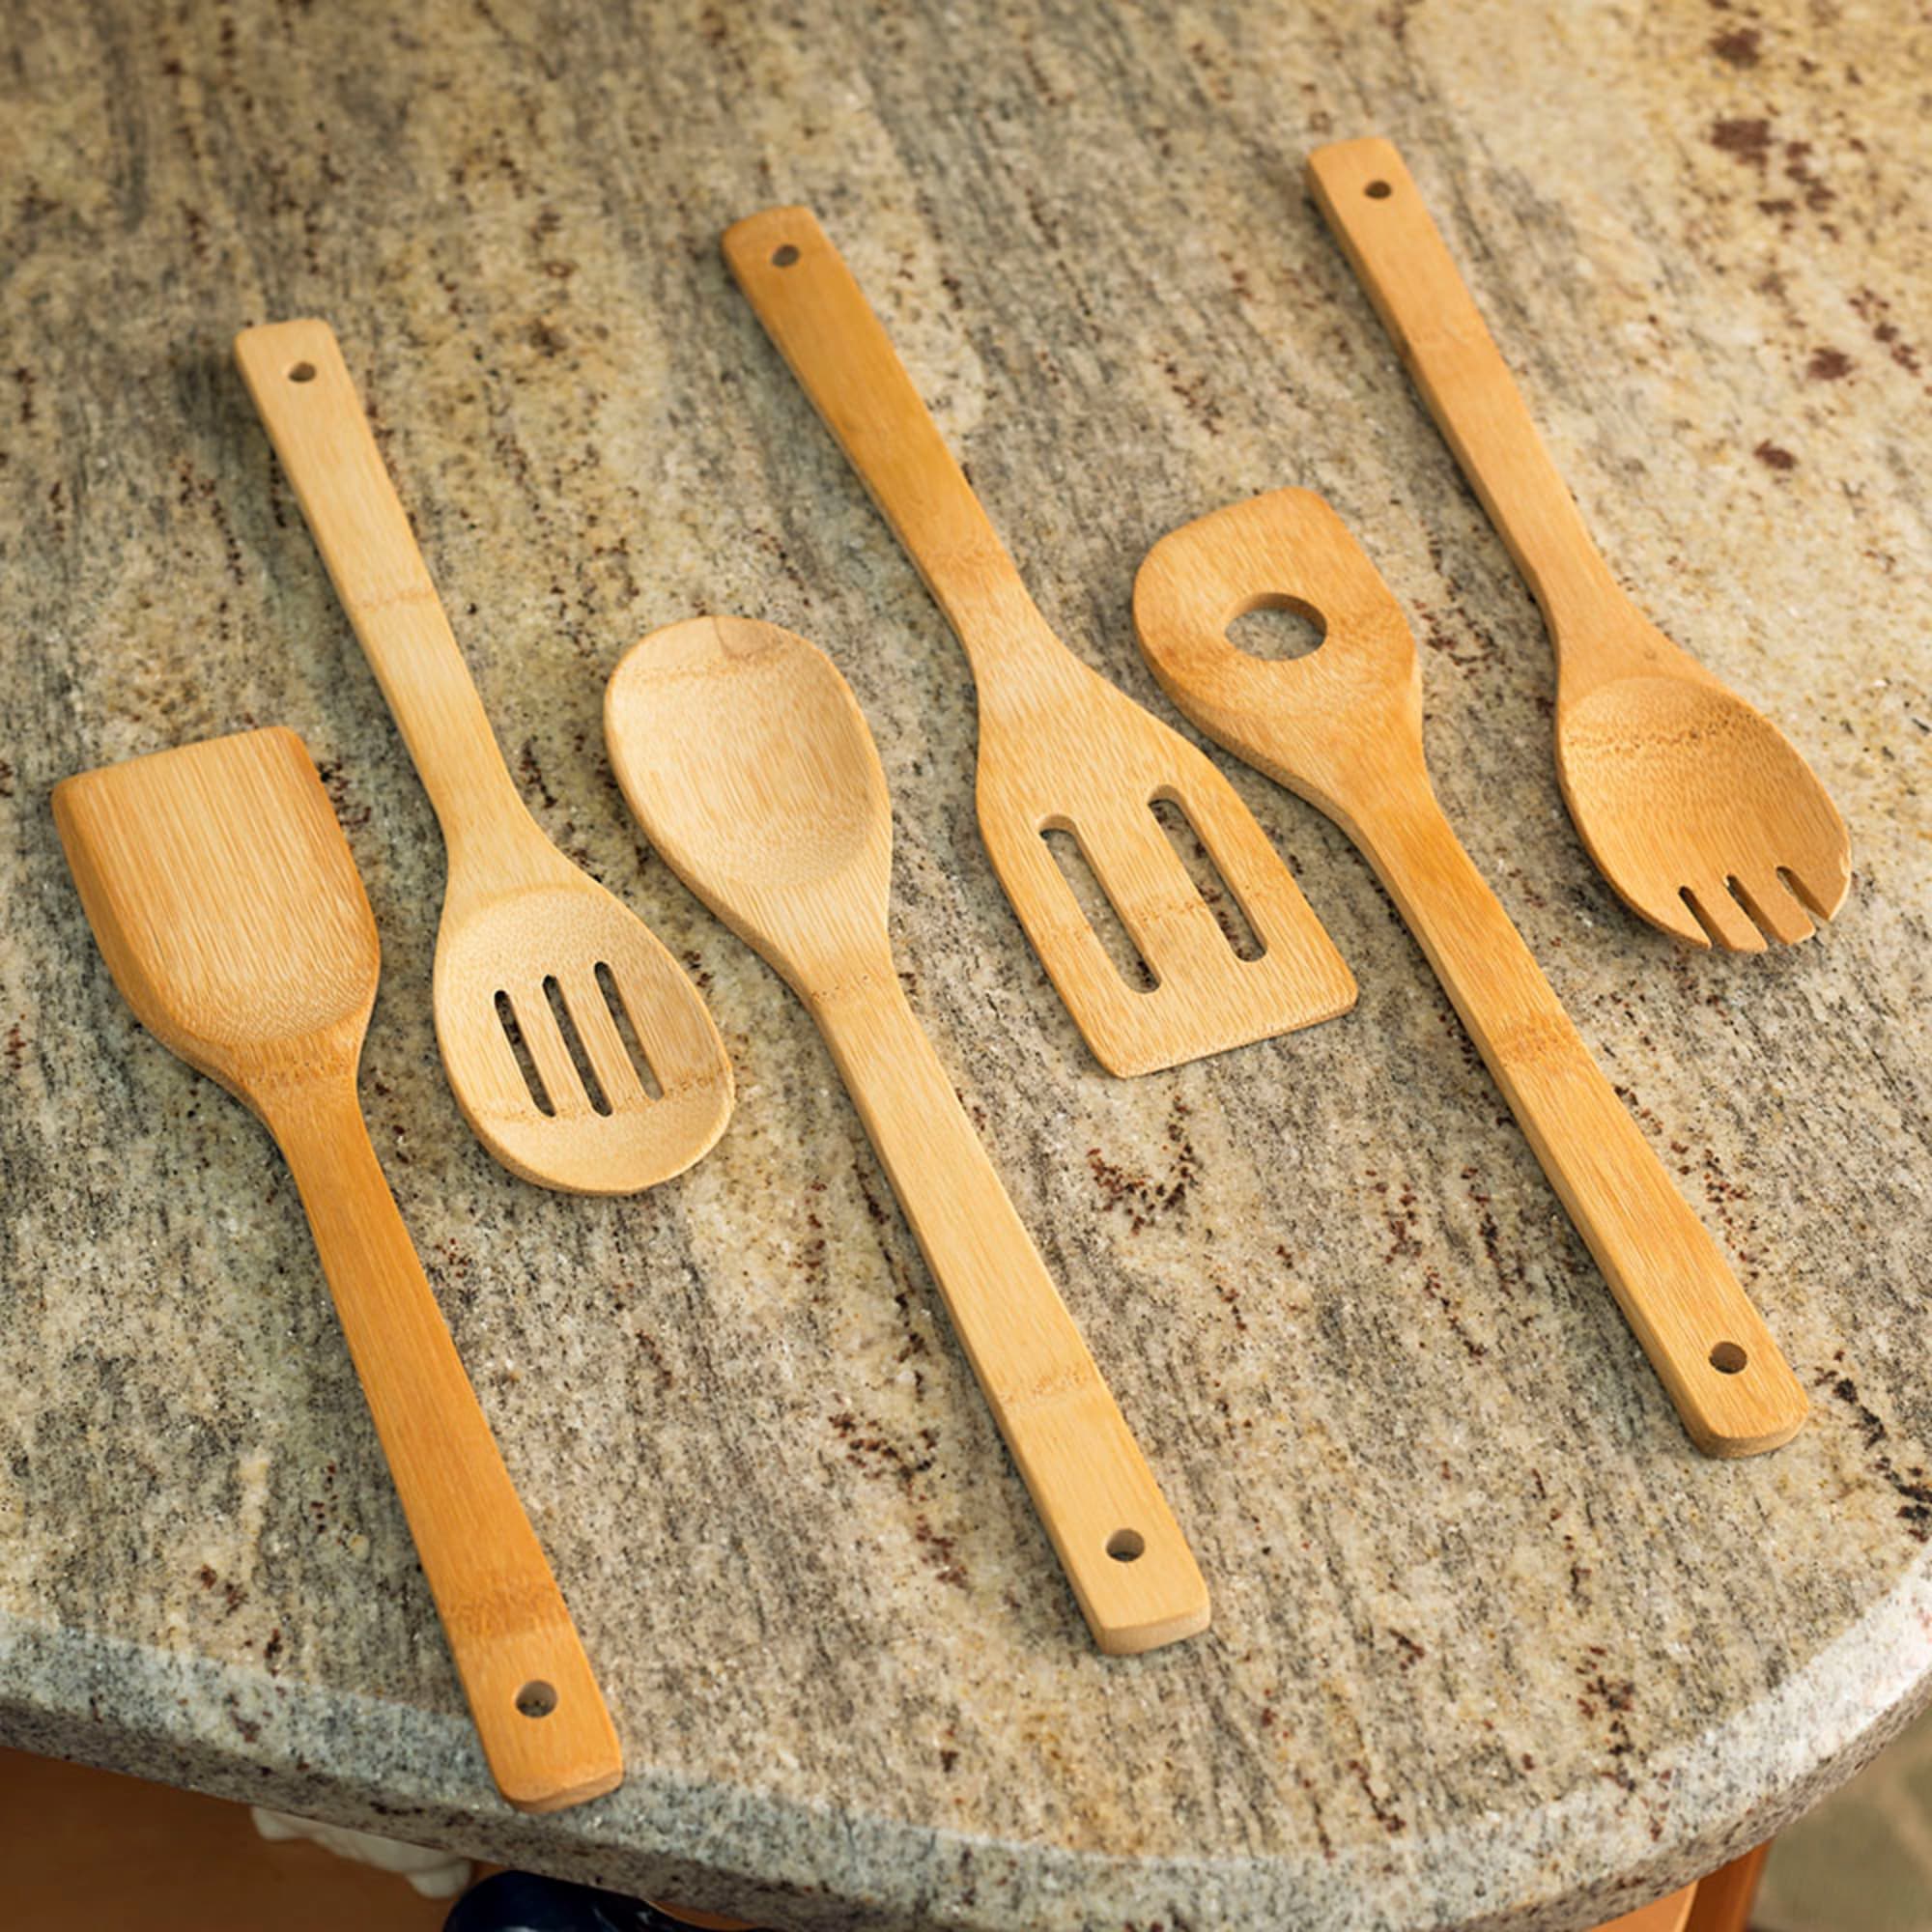 Home Basics 6 Piece Bamboo Kitchen Tool Set, Natural $3.00 EACH, CASE PACK OF 24